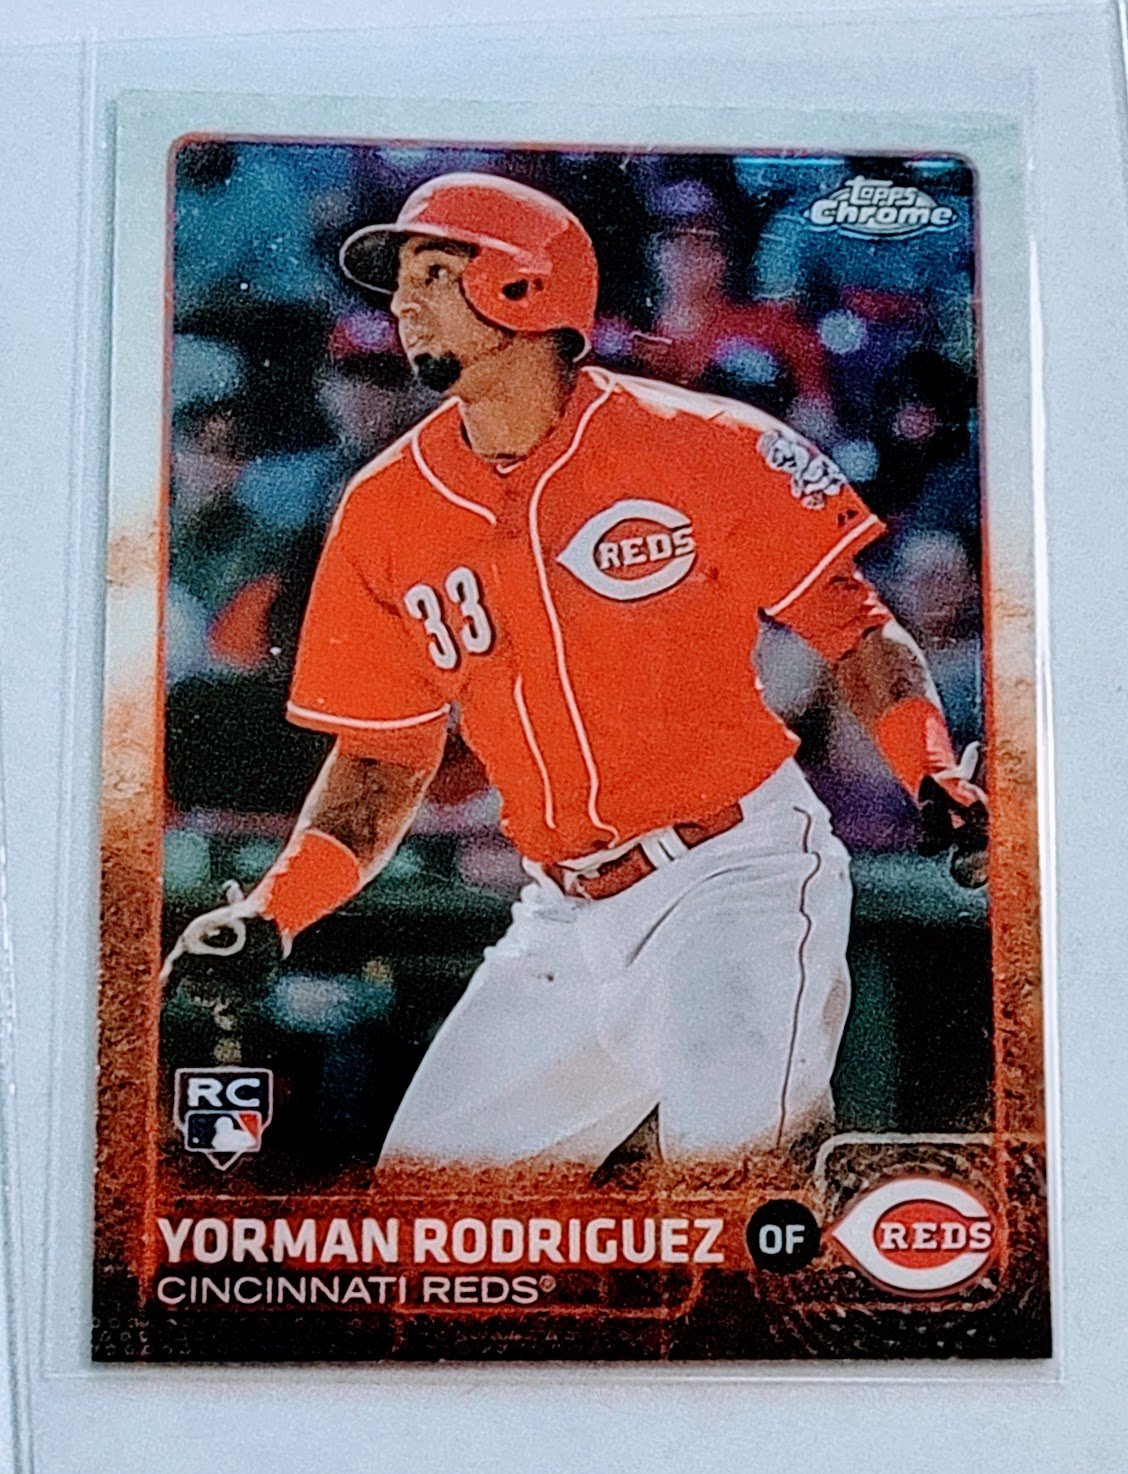 2015 Topps Yorman Rodriguez Rookie Baseball Card TPTV simple Xclusive Collectibles   